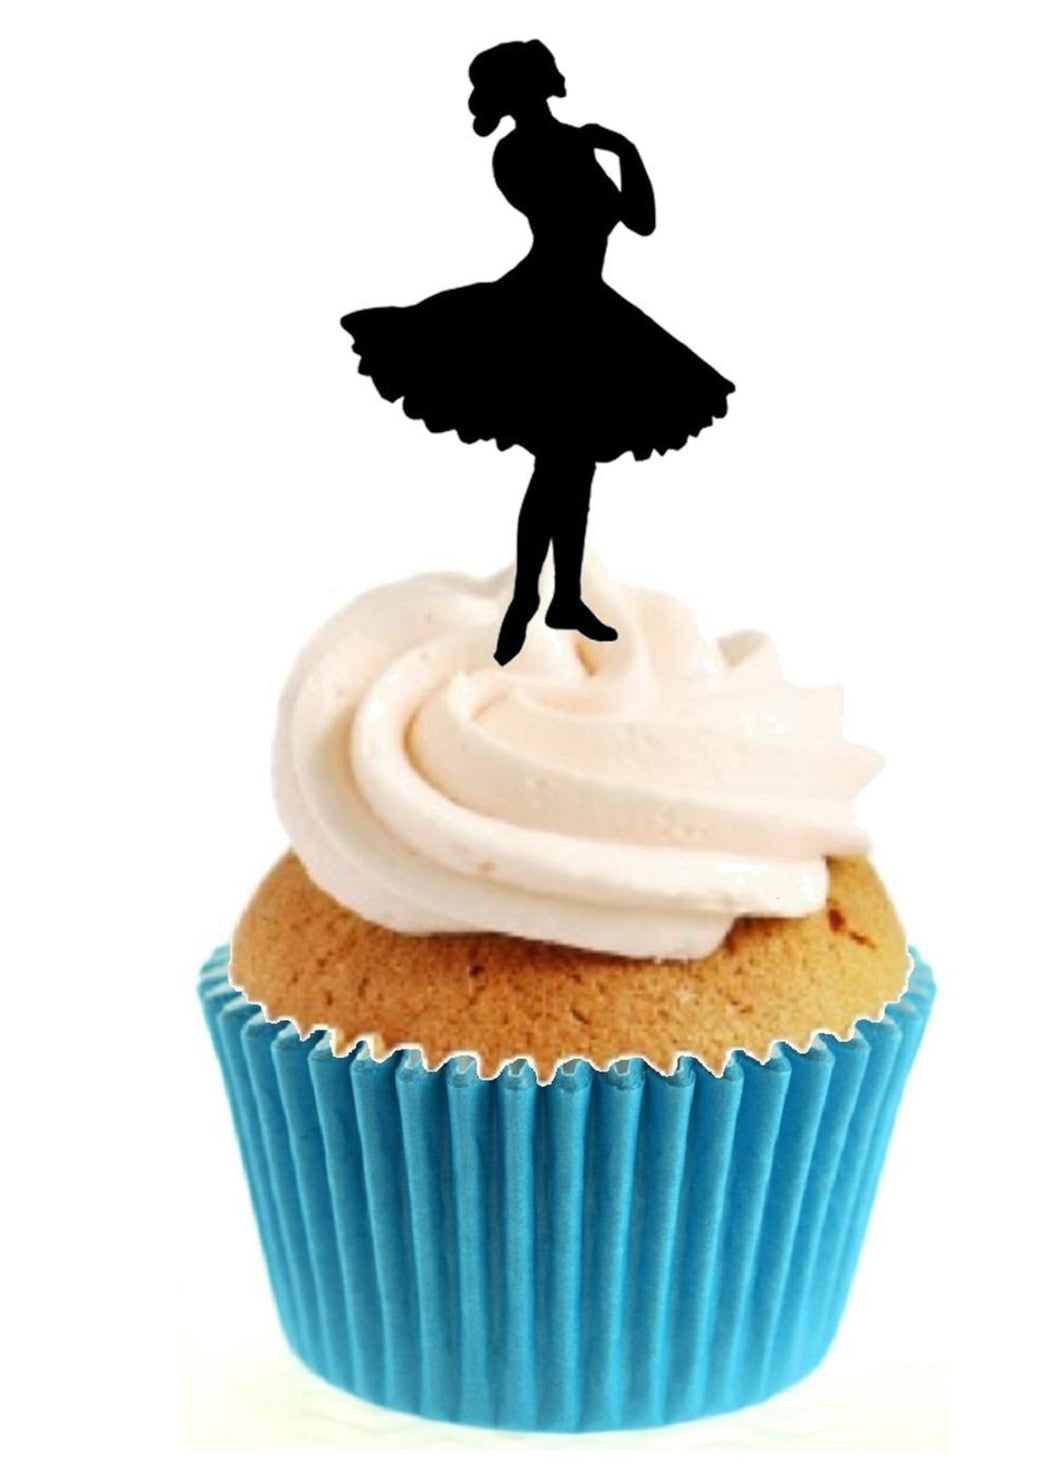 Ballerina Silhouette Stand Up Cake Toppers (12 pack)  Pack contains 12 images printed onto premium wafer card